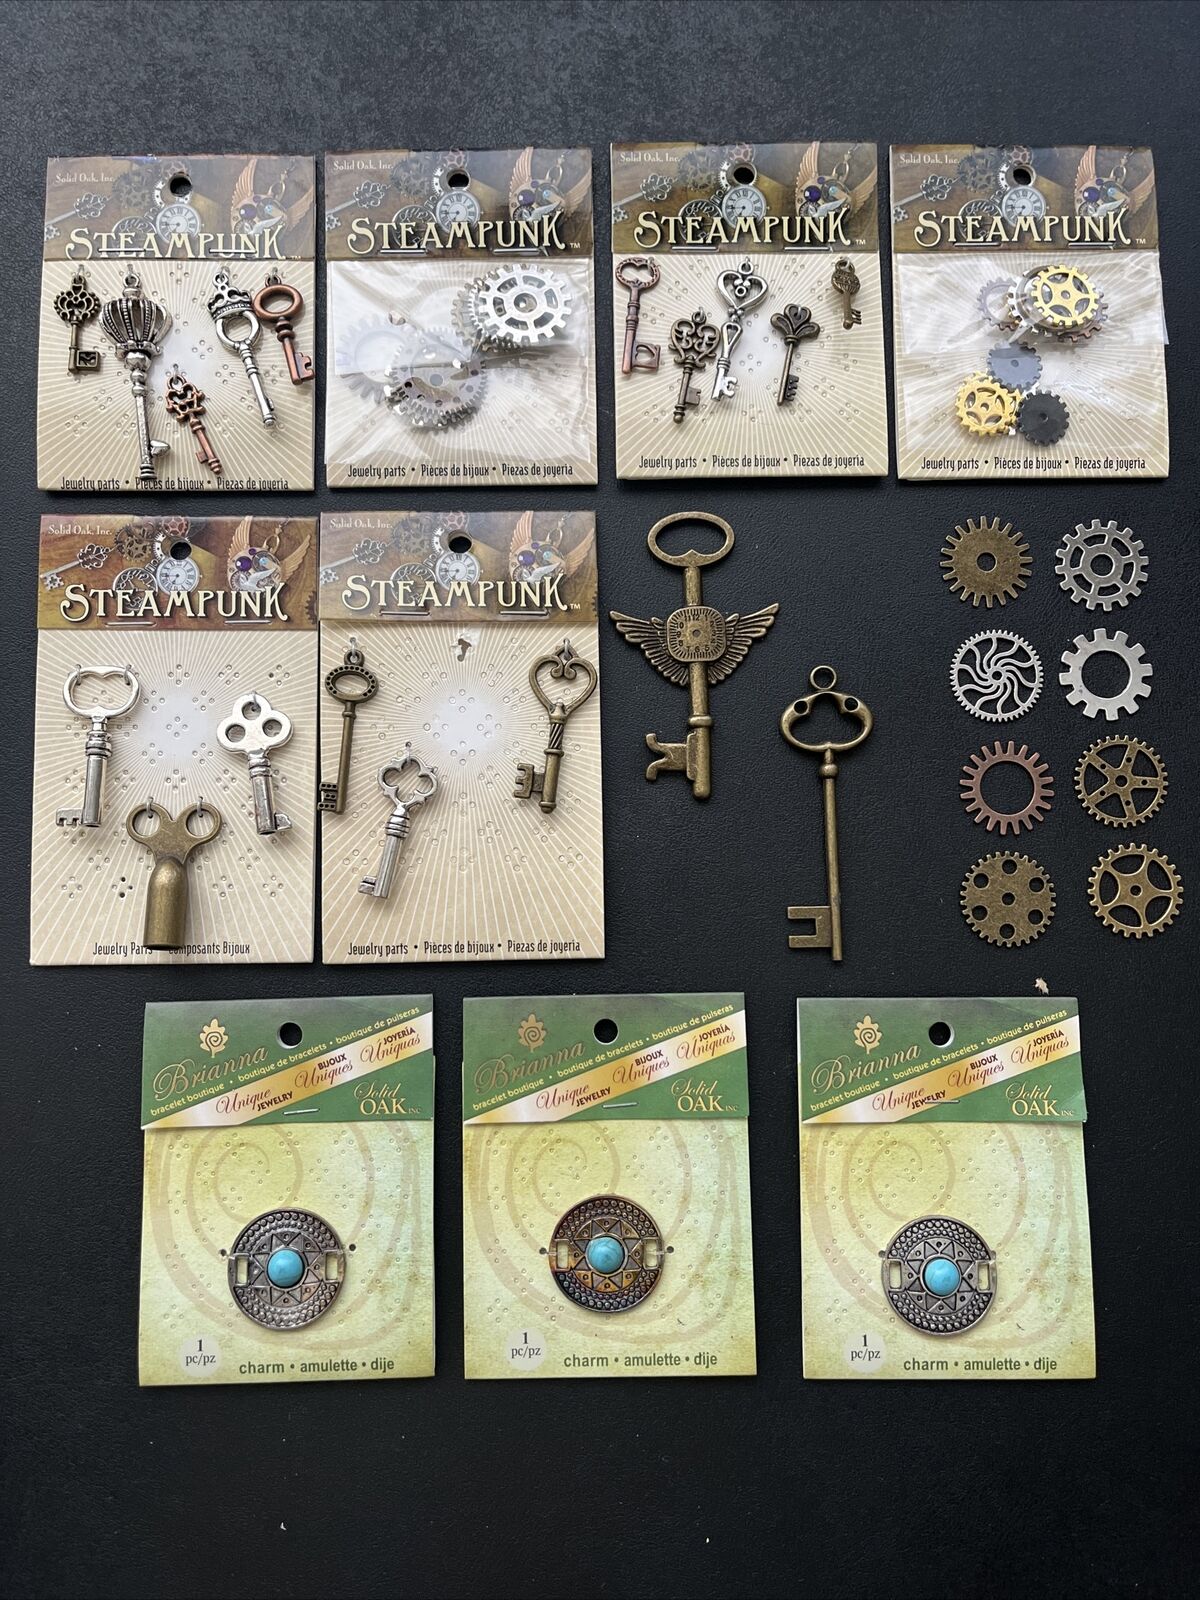 SOLID OAK INC / BRIANNA Steampunk Lot Of Keys Cogs Gears Charms Jewelry Crafts